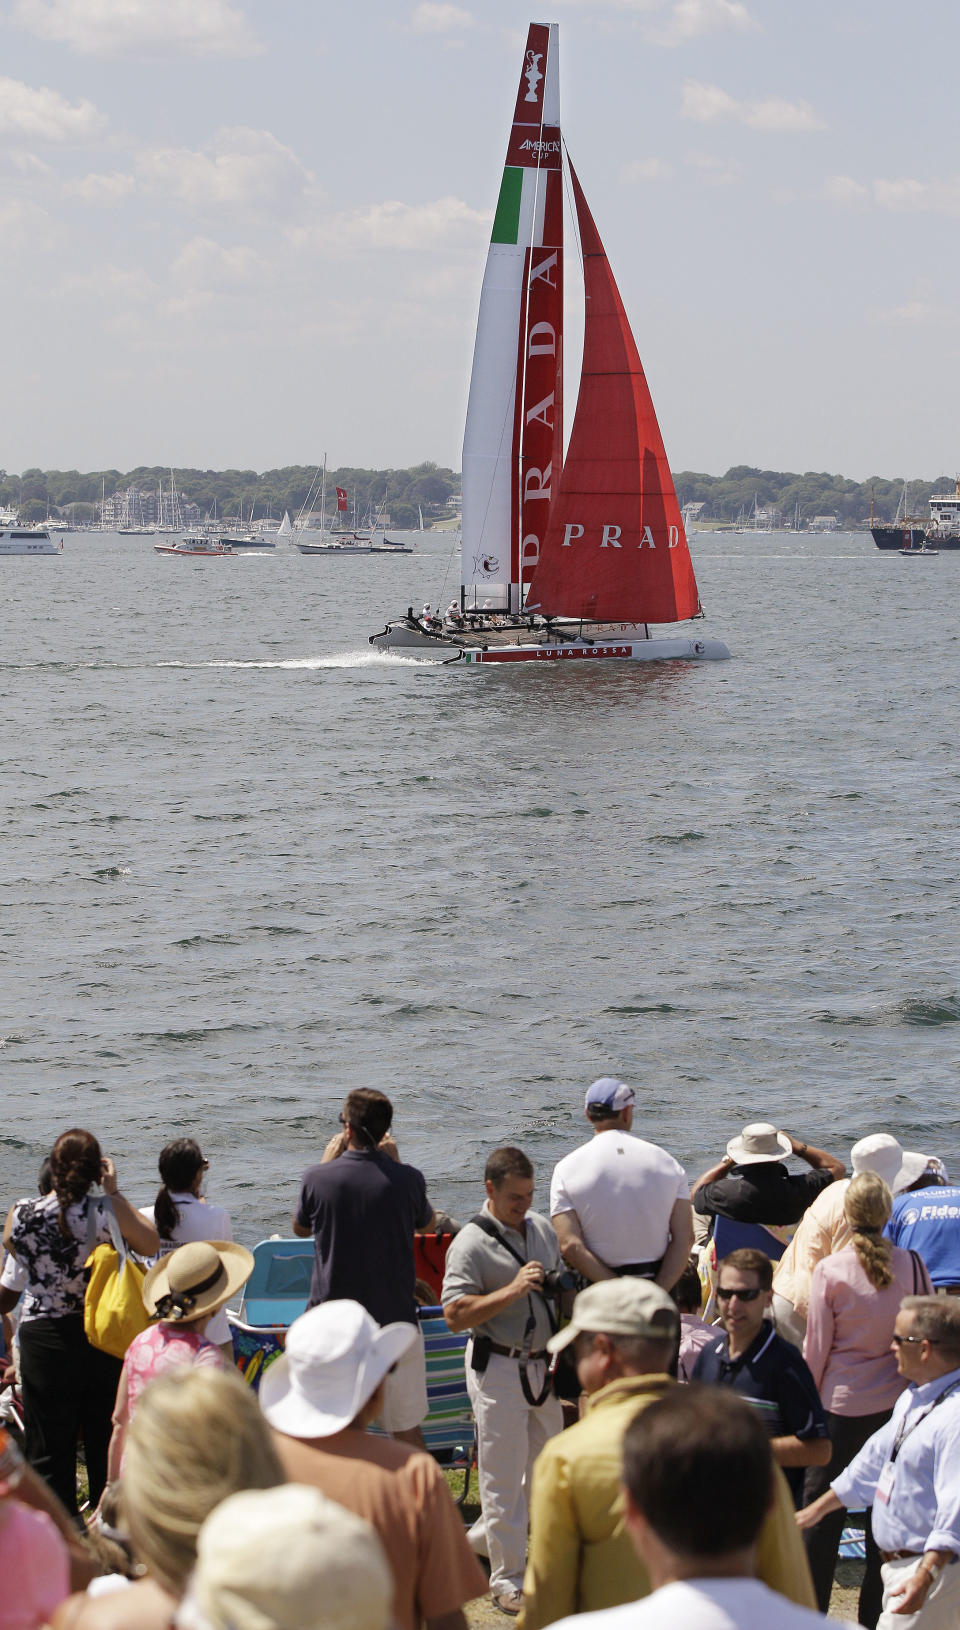 Spectators at Fort Adams State Park watch a match race at the first day of the America's Cup World Series regatta in Newport, RI., Thursday, June 28, 2012. State tourism officials say 7,400 people attended the first day of racing and hope 50,000 people in total will visit the nine-day event, which features four days of racing. (AP Photo/Stephan Savoia)